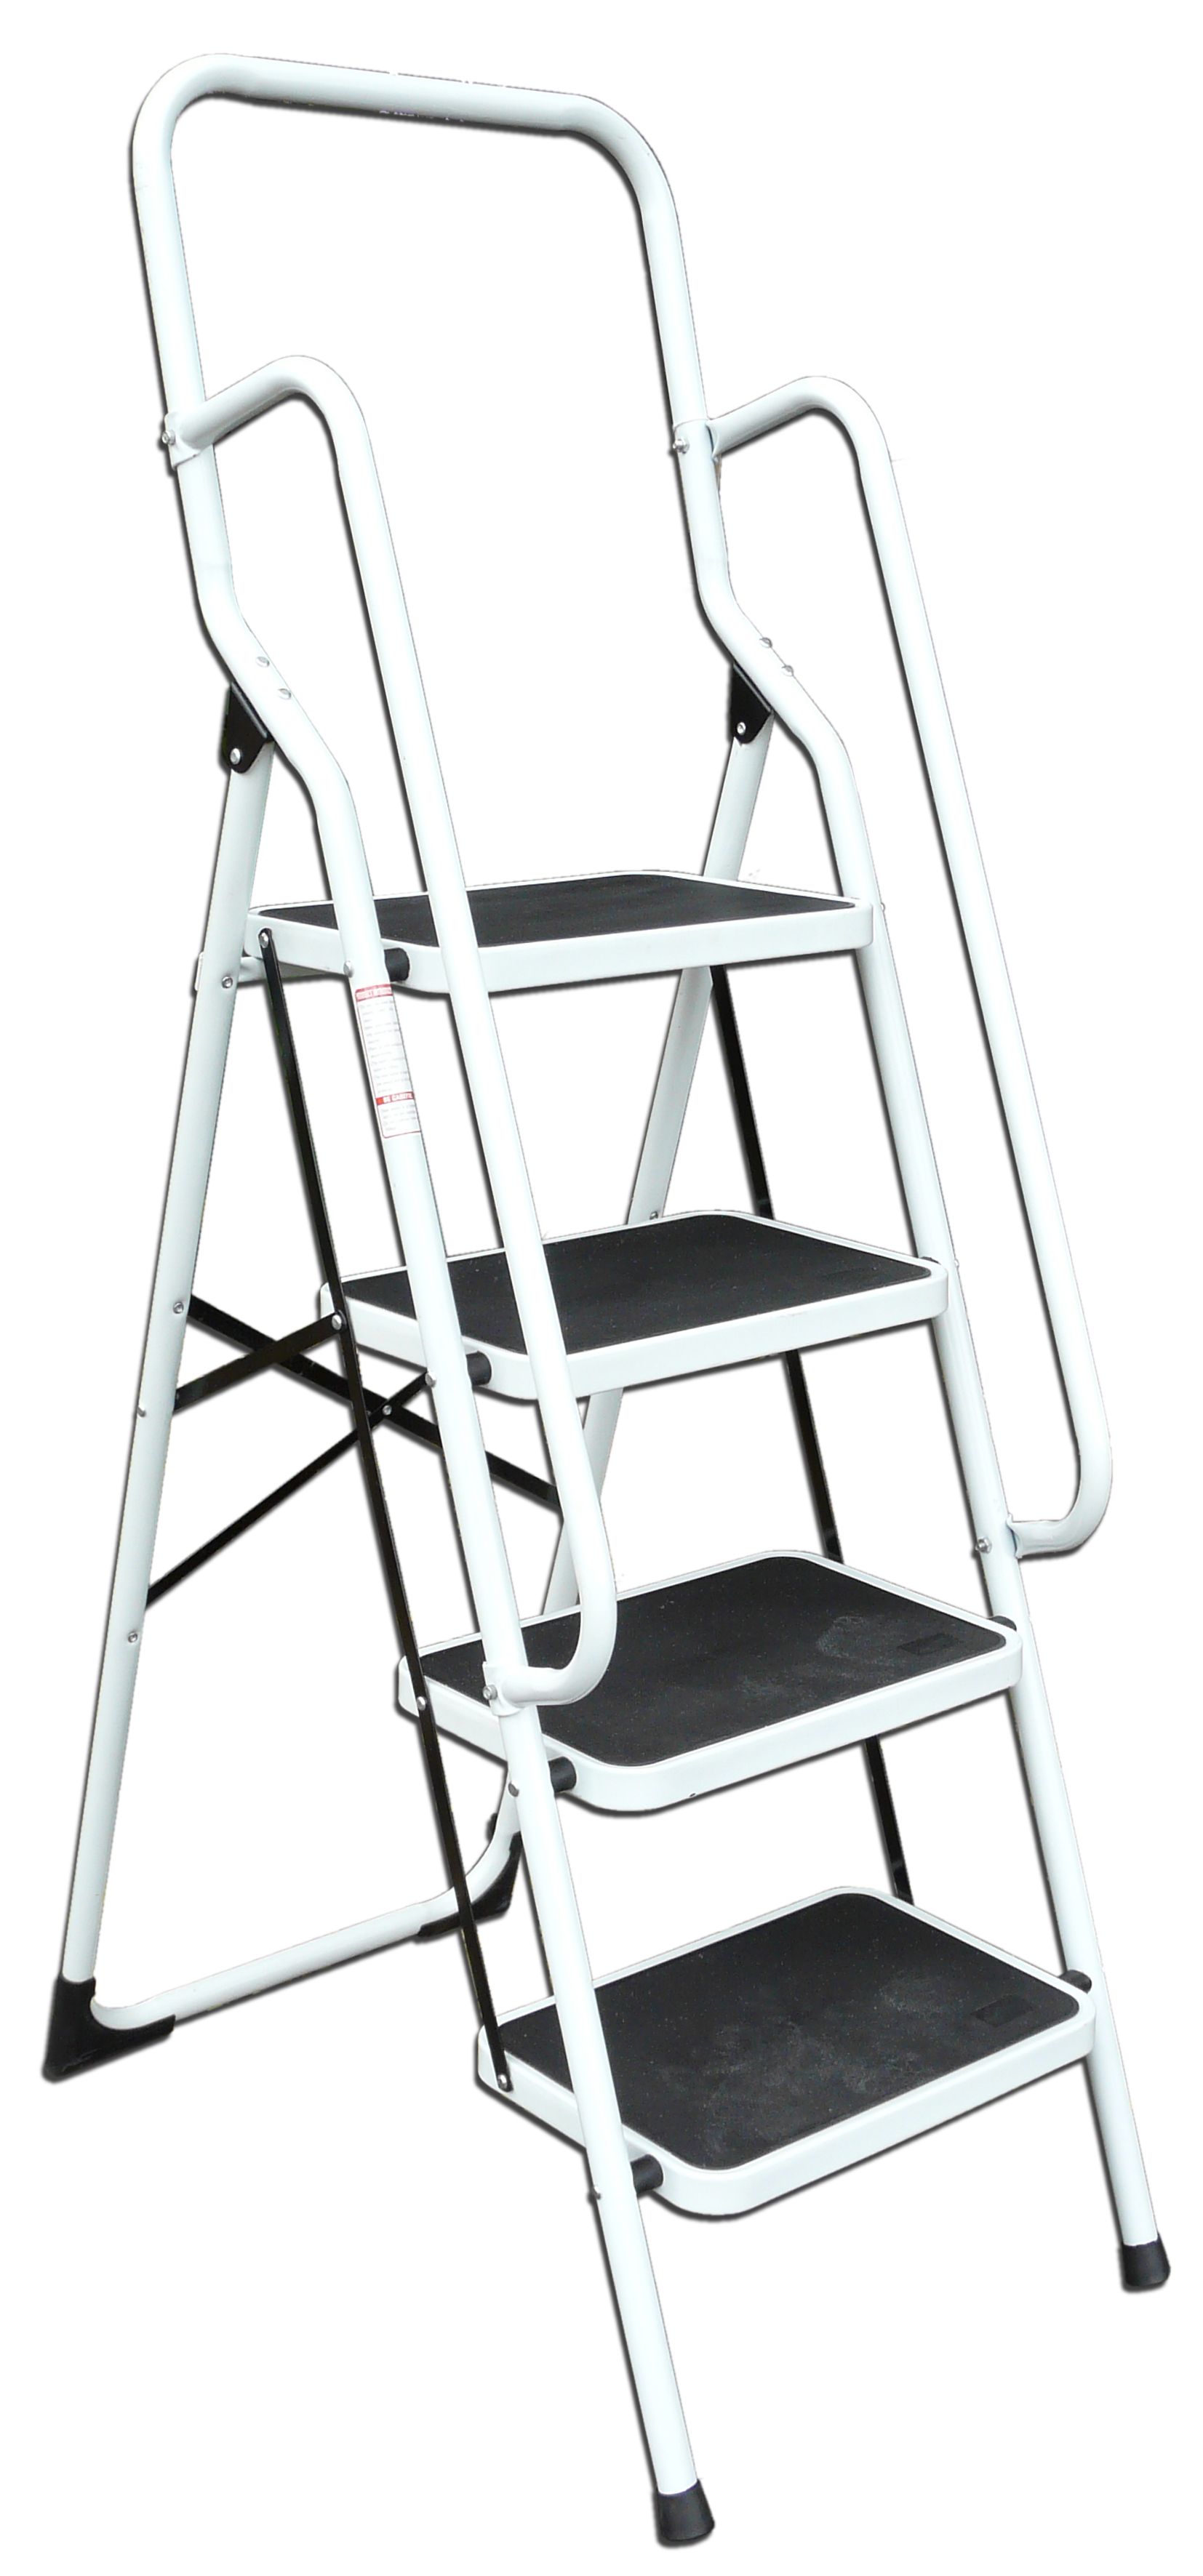 4 Step Ladder with Safety Rail - Ladders Steps